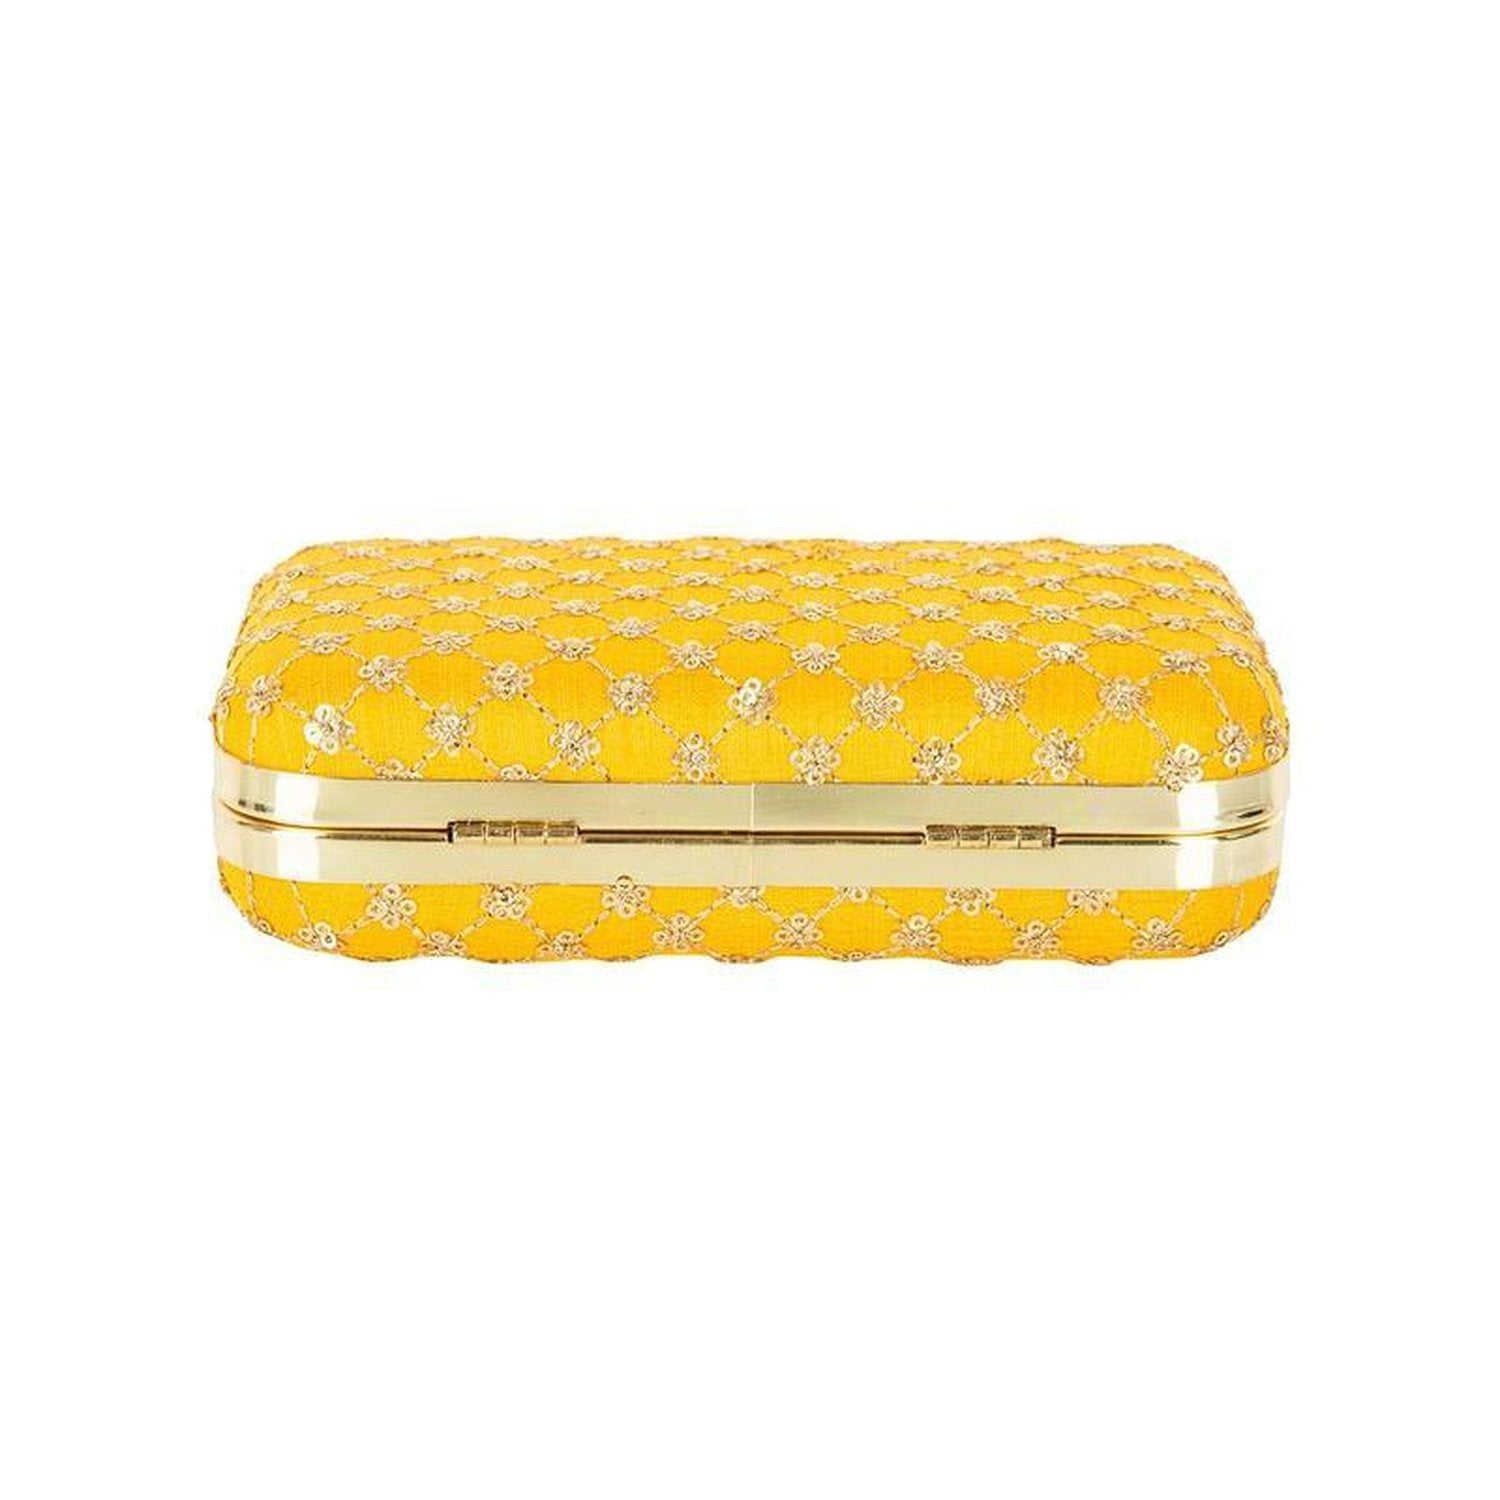 Yellow Handcrafted Embroidered Party Wear Ladies clutch bags - Stilento